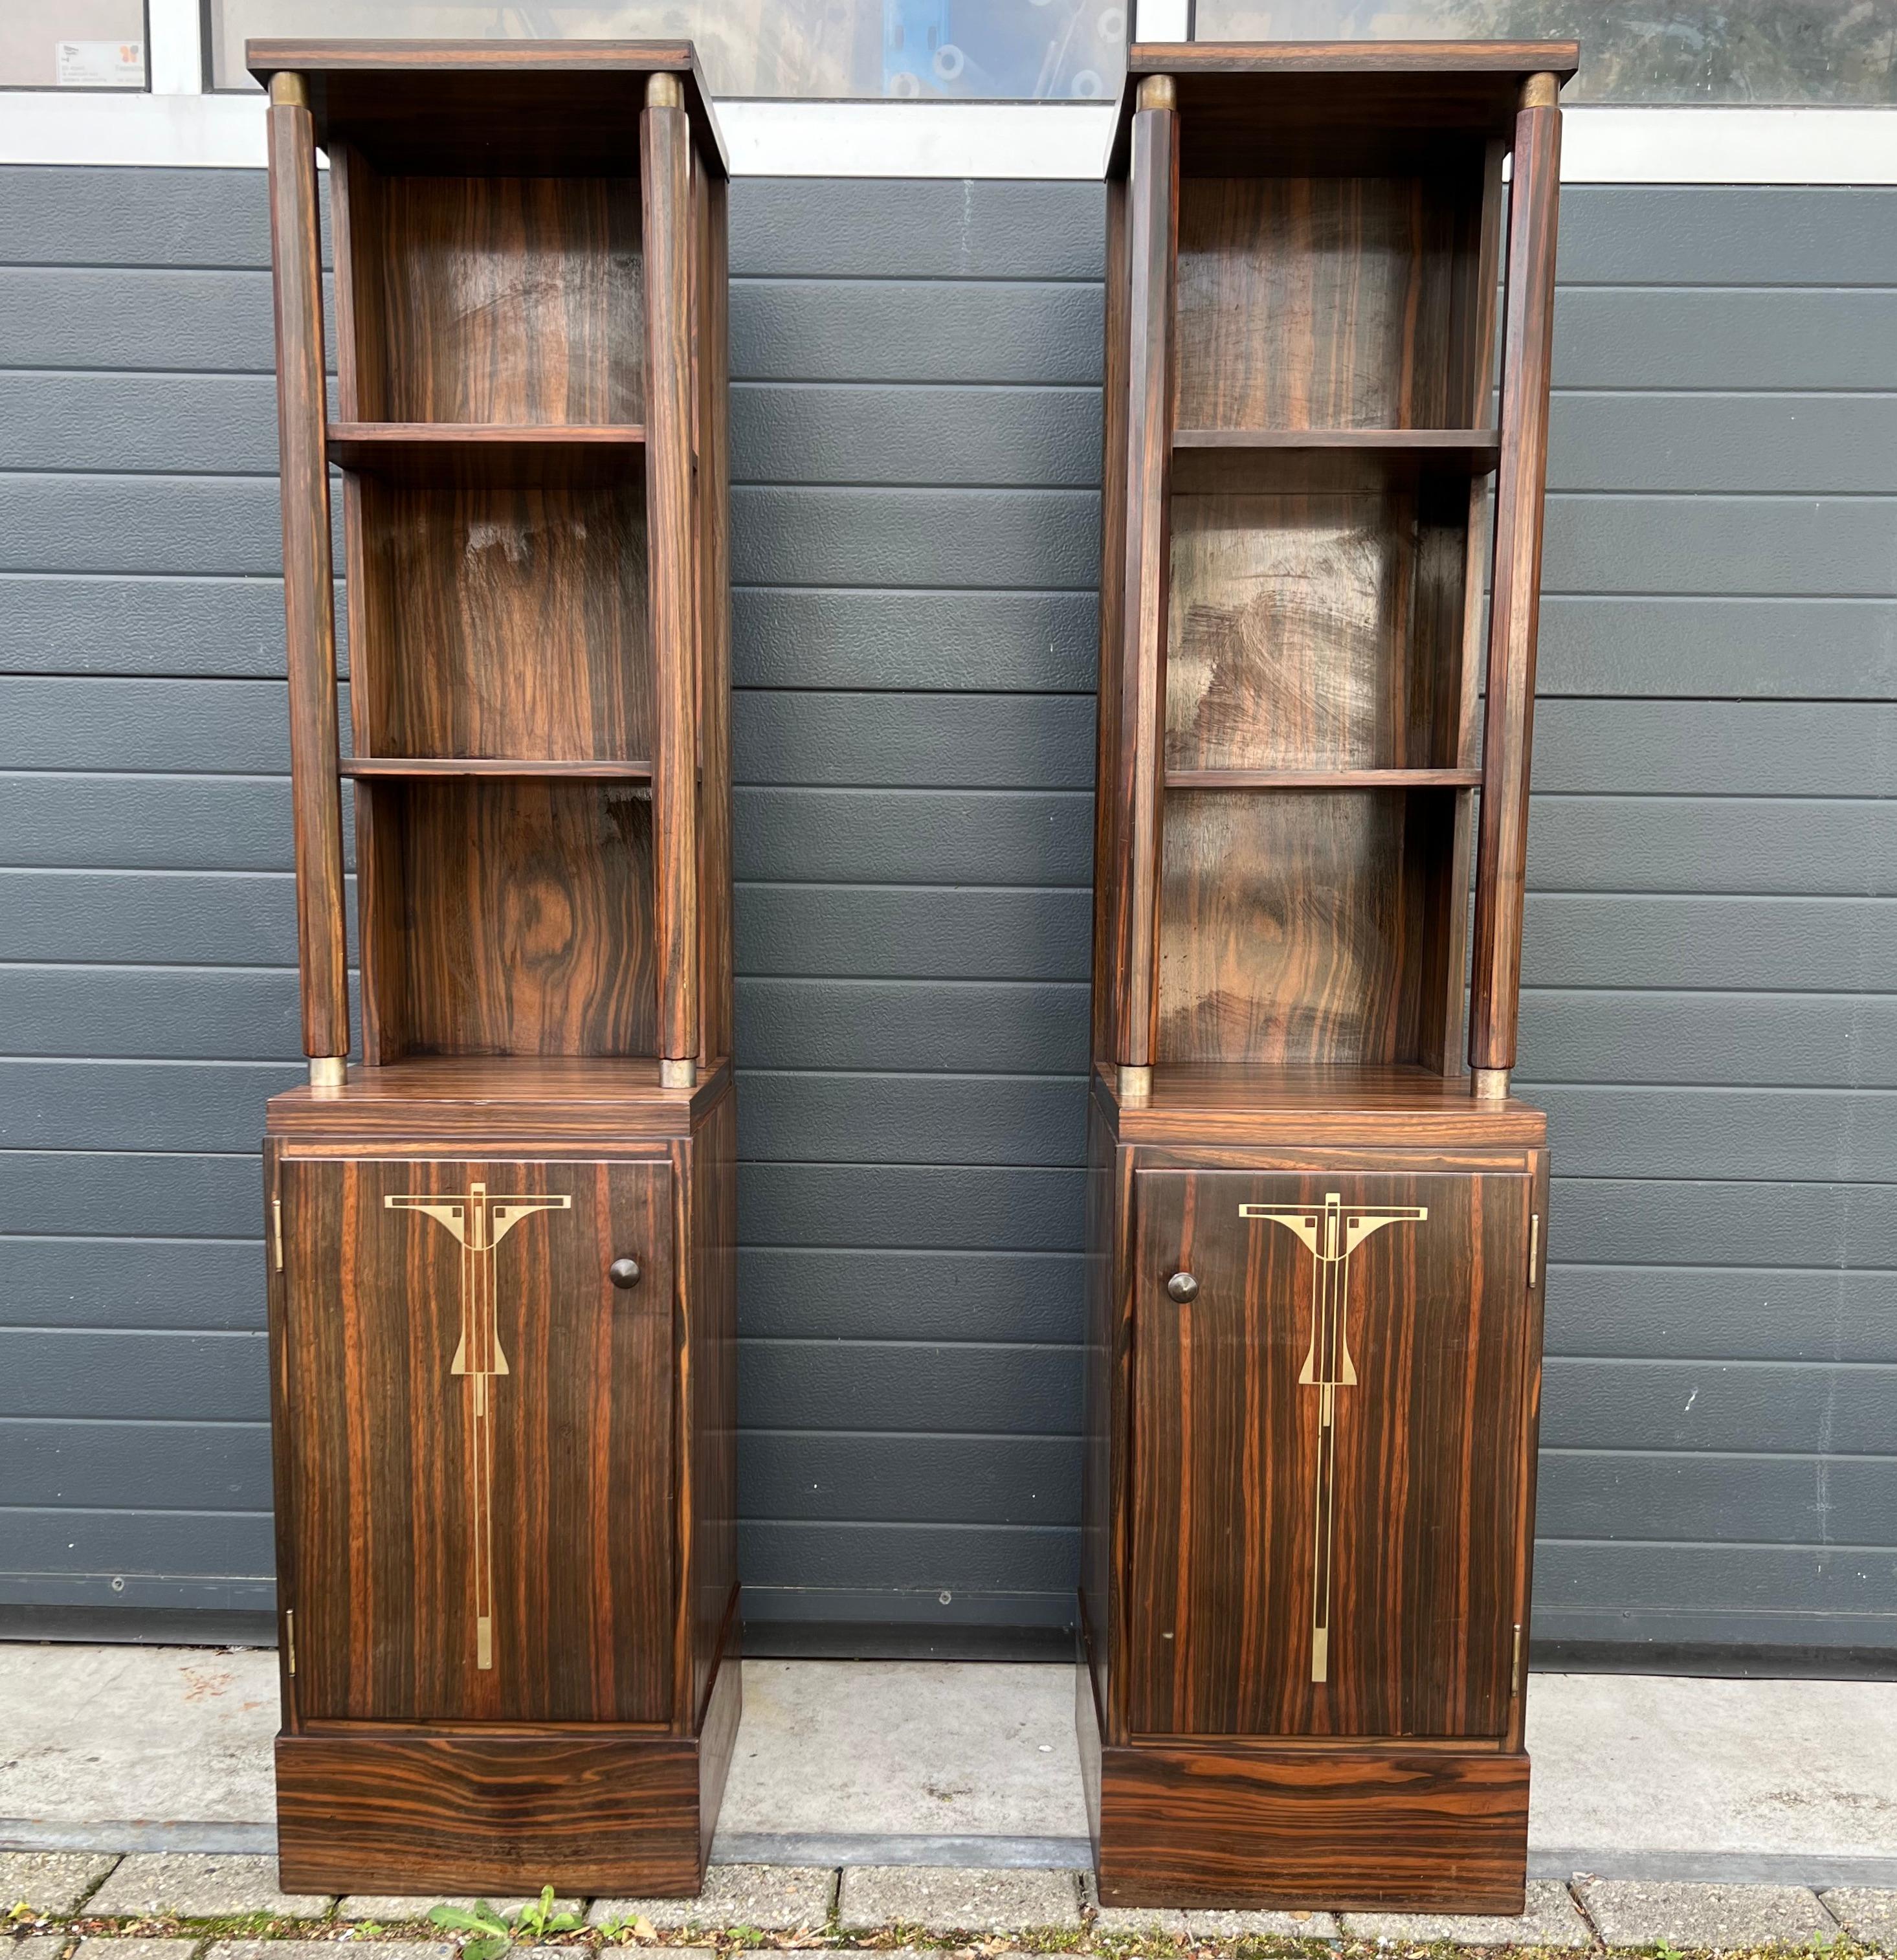 Top class luxurious coromandel Art Deco bookcases, cabinets, nightstands or stands

This early twentieth century and good size Austrian pair of Art Deco bookcases with its stunning design makes a great statement piece for your private library or